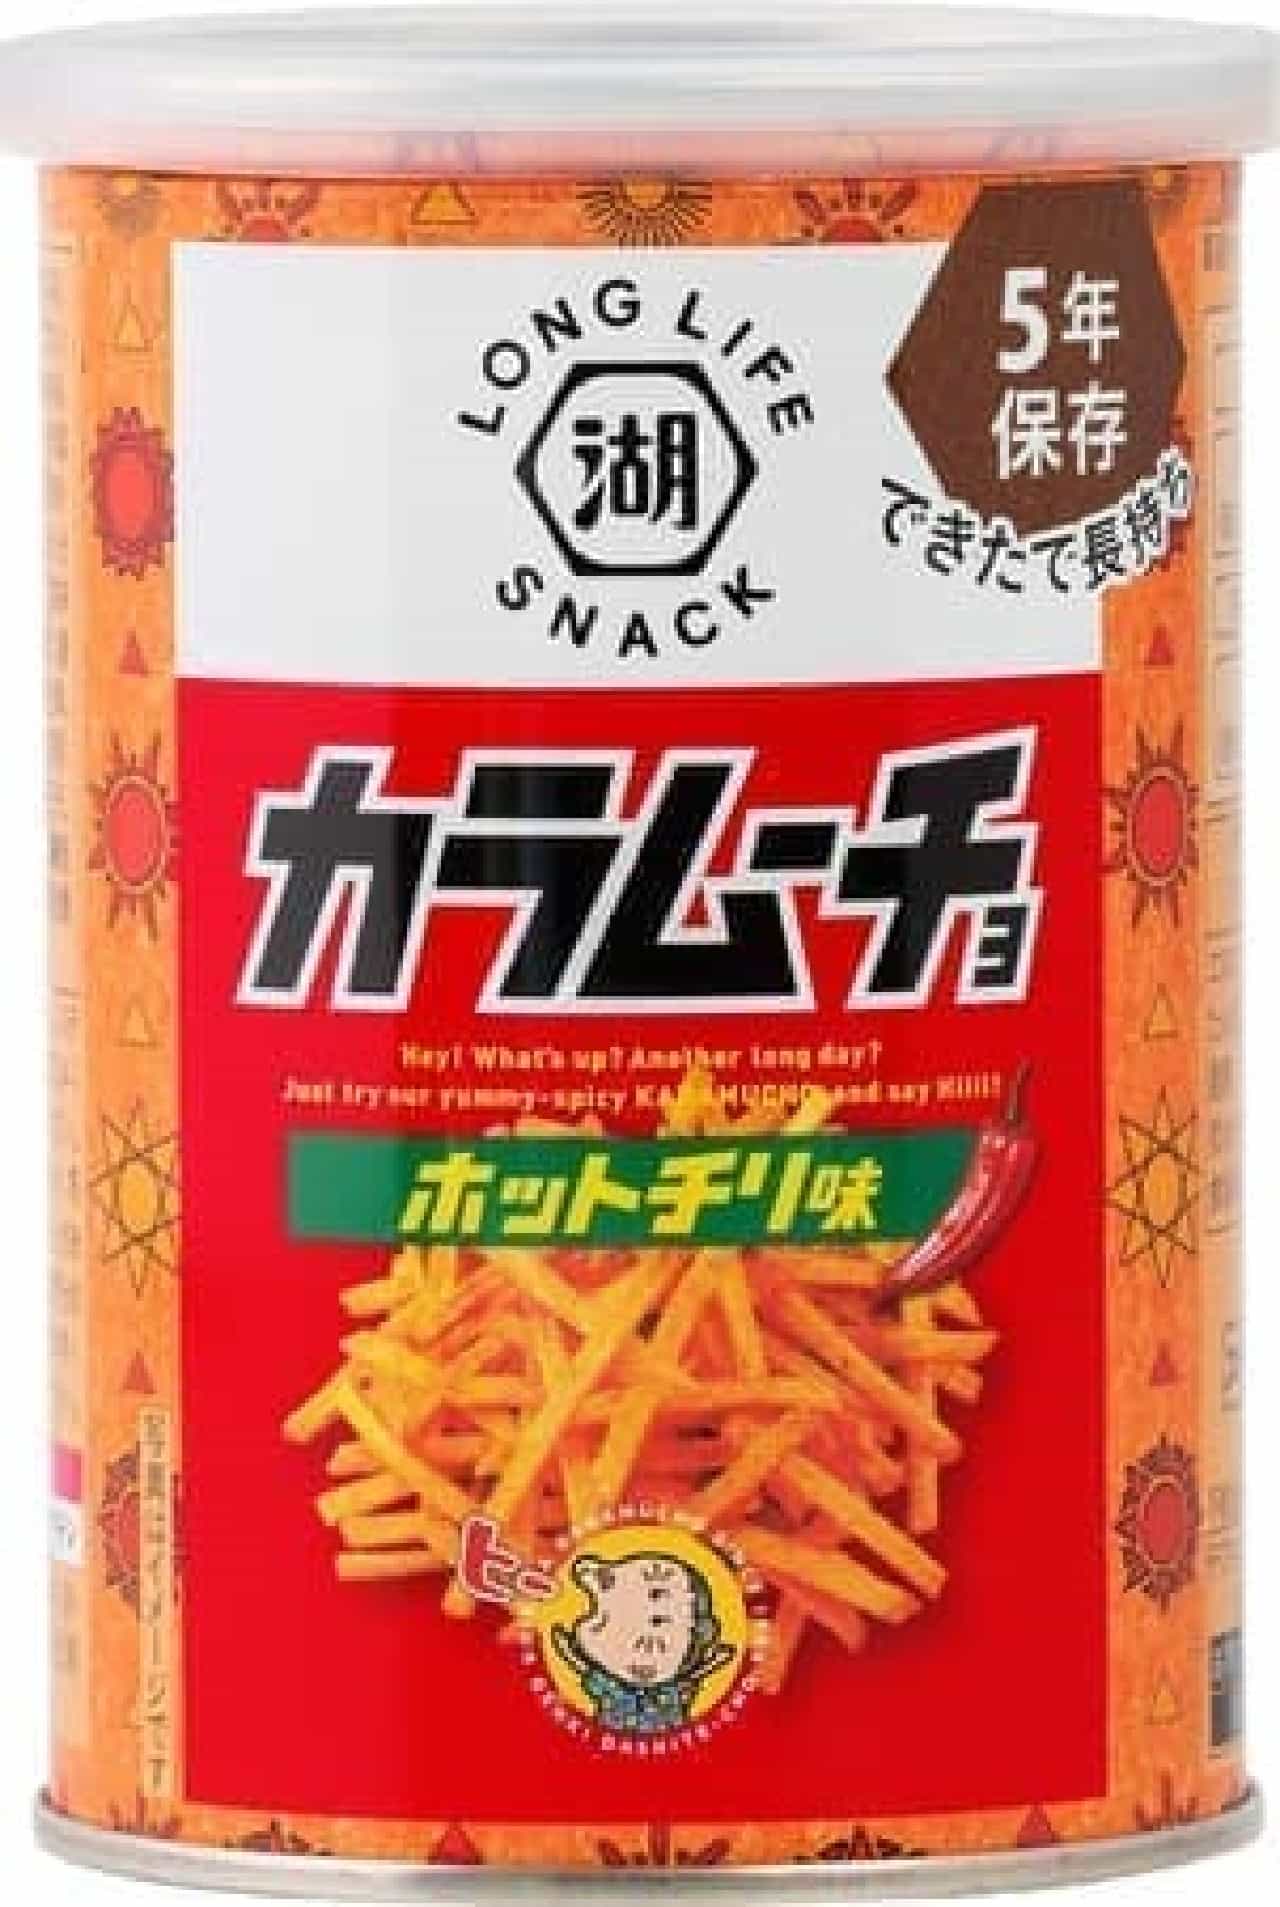 Introducing the KOIKEYA LONG LIFE SNACK series --Potato chips for stockpiling that can be stored for 5 years